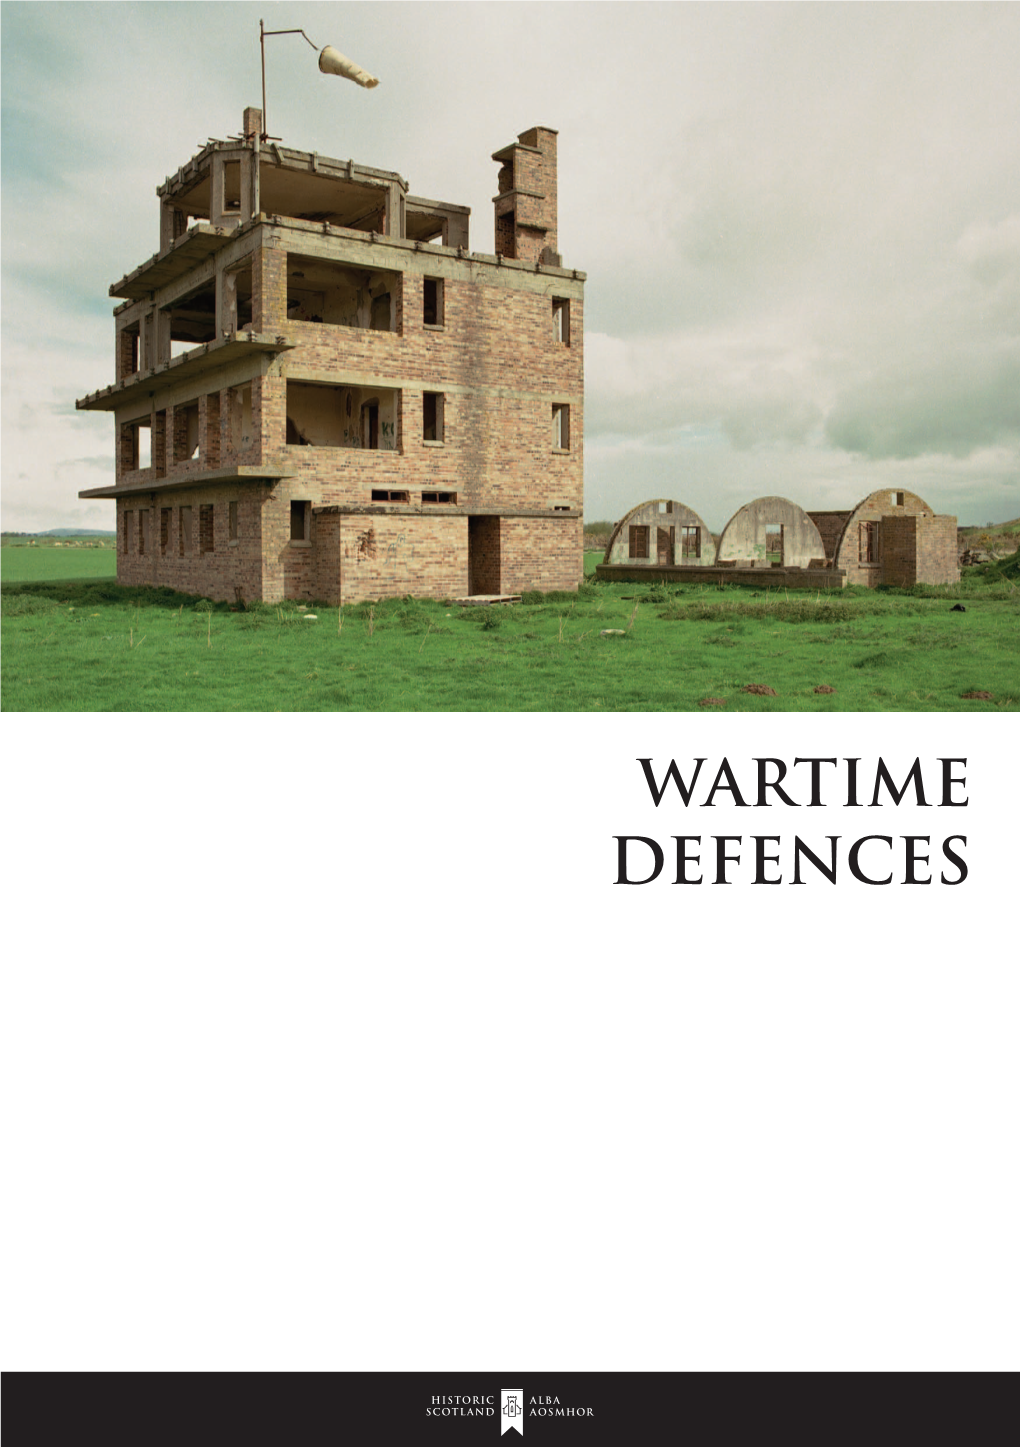 WARTIME DEFENCES He Story of Wartime Defences Tin Scotland in Recent Centuries Begins with Martello Towers